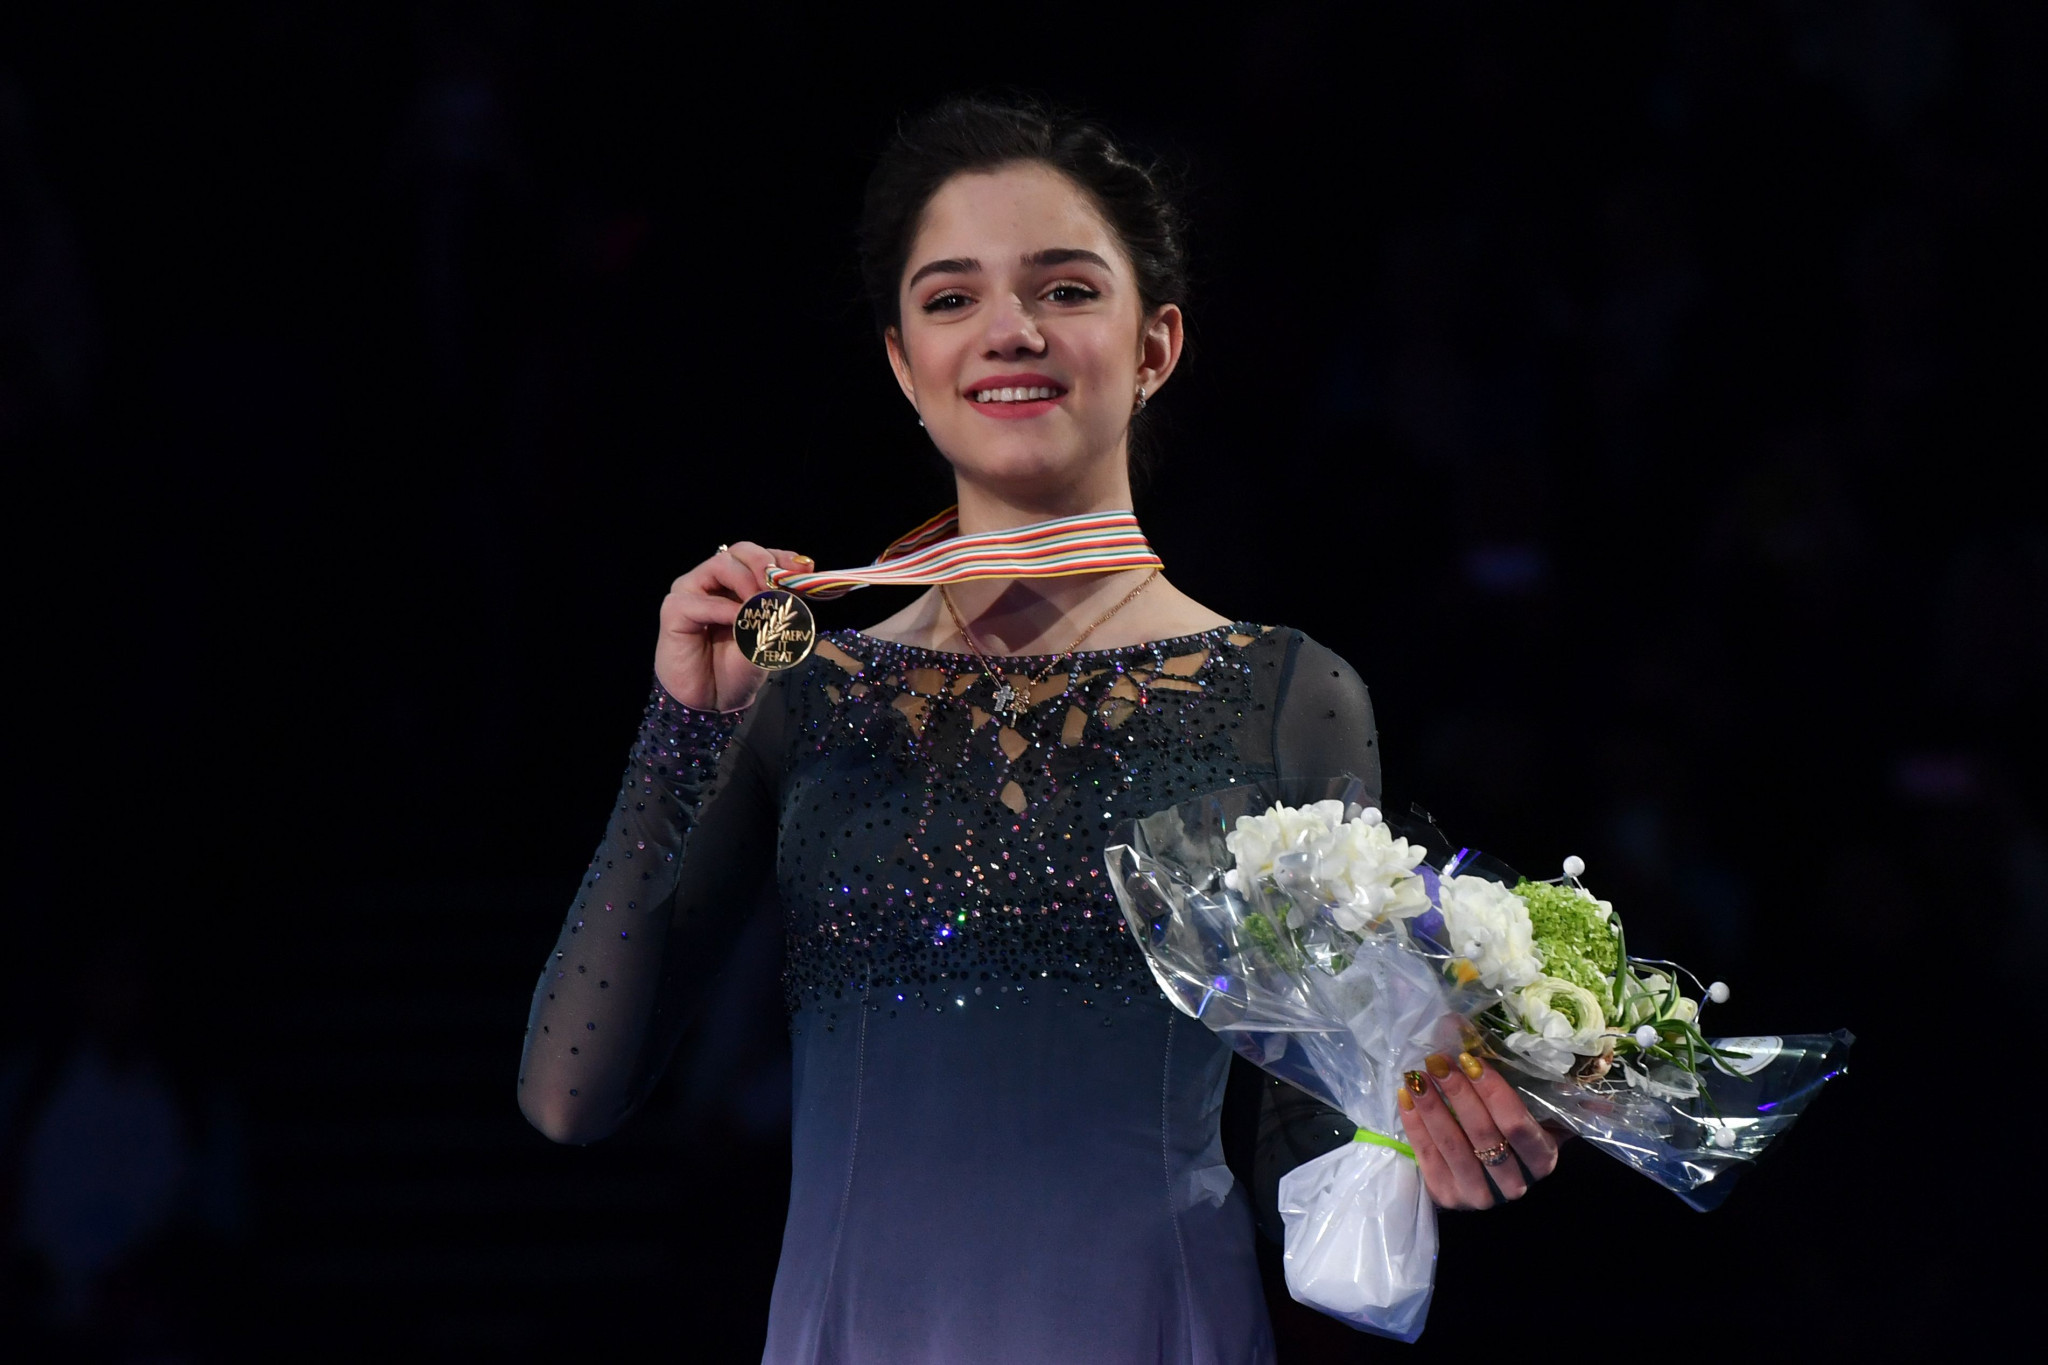 Russia's Evgenia Medvedeva is to return to competitive figure skating after sustaining an injury in October ©Getty Images